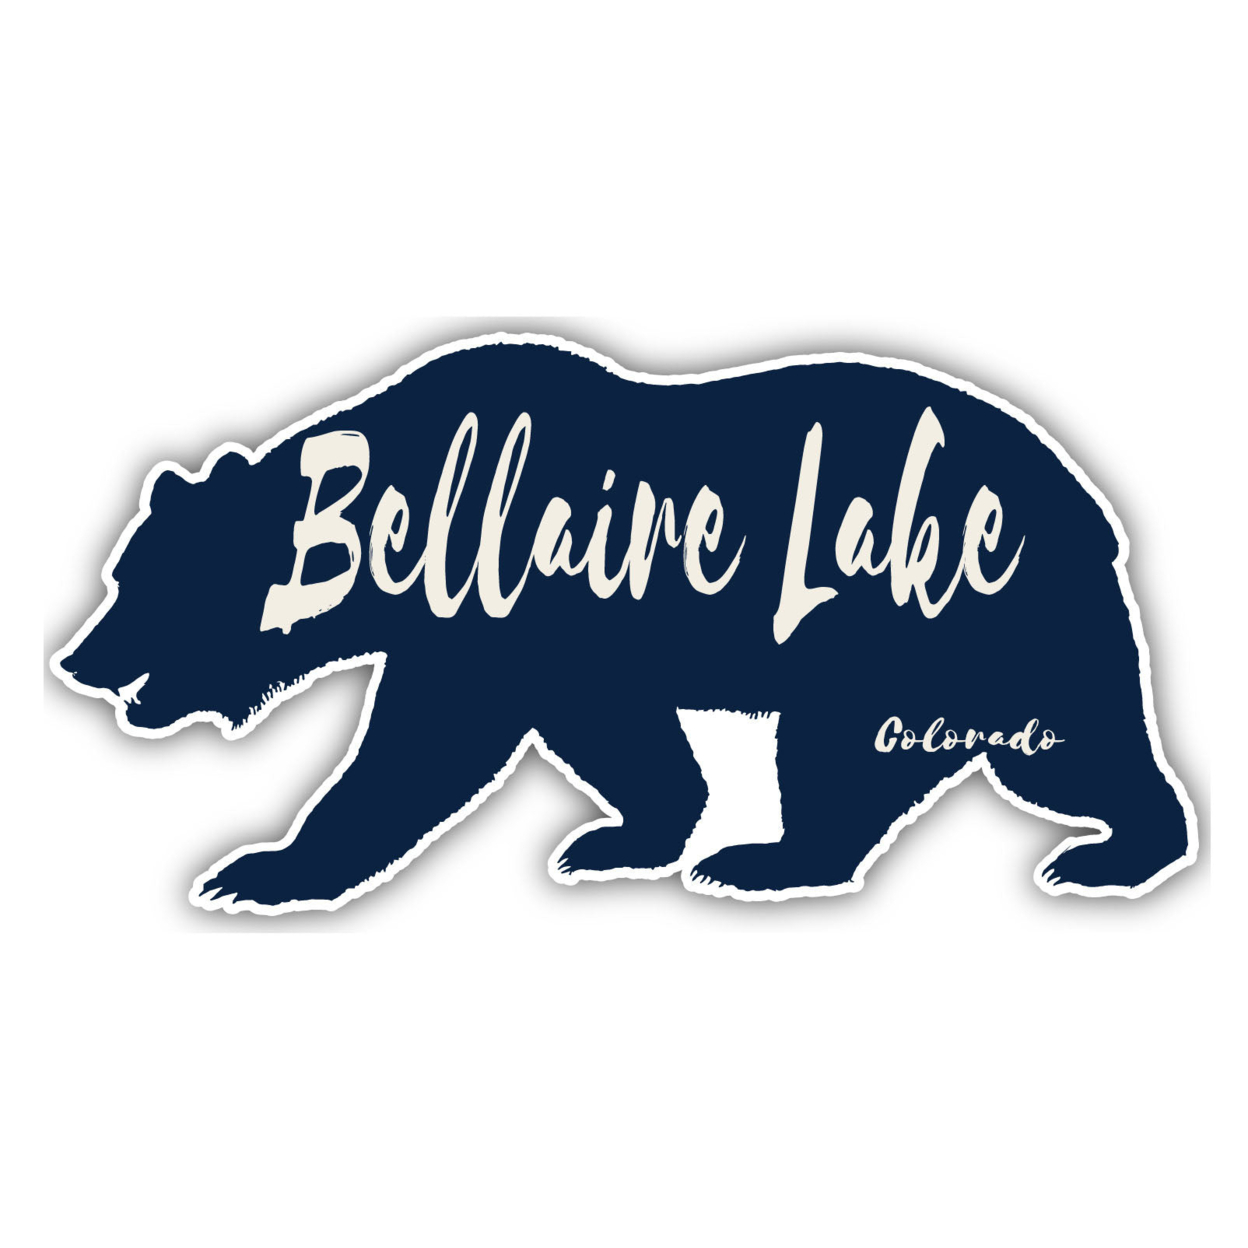 Bellaire Lake Colorado Souvenir Decorative Stickers (Choose Theme And Size) - 4-Pack, 10-Inch, Bear